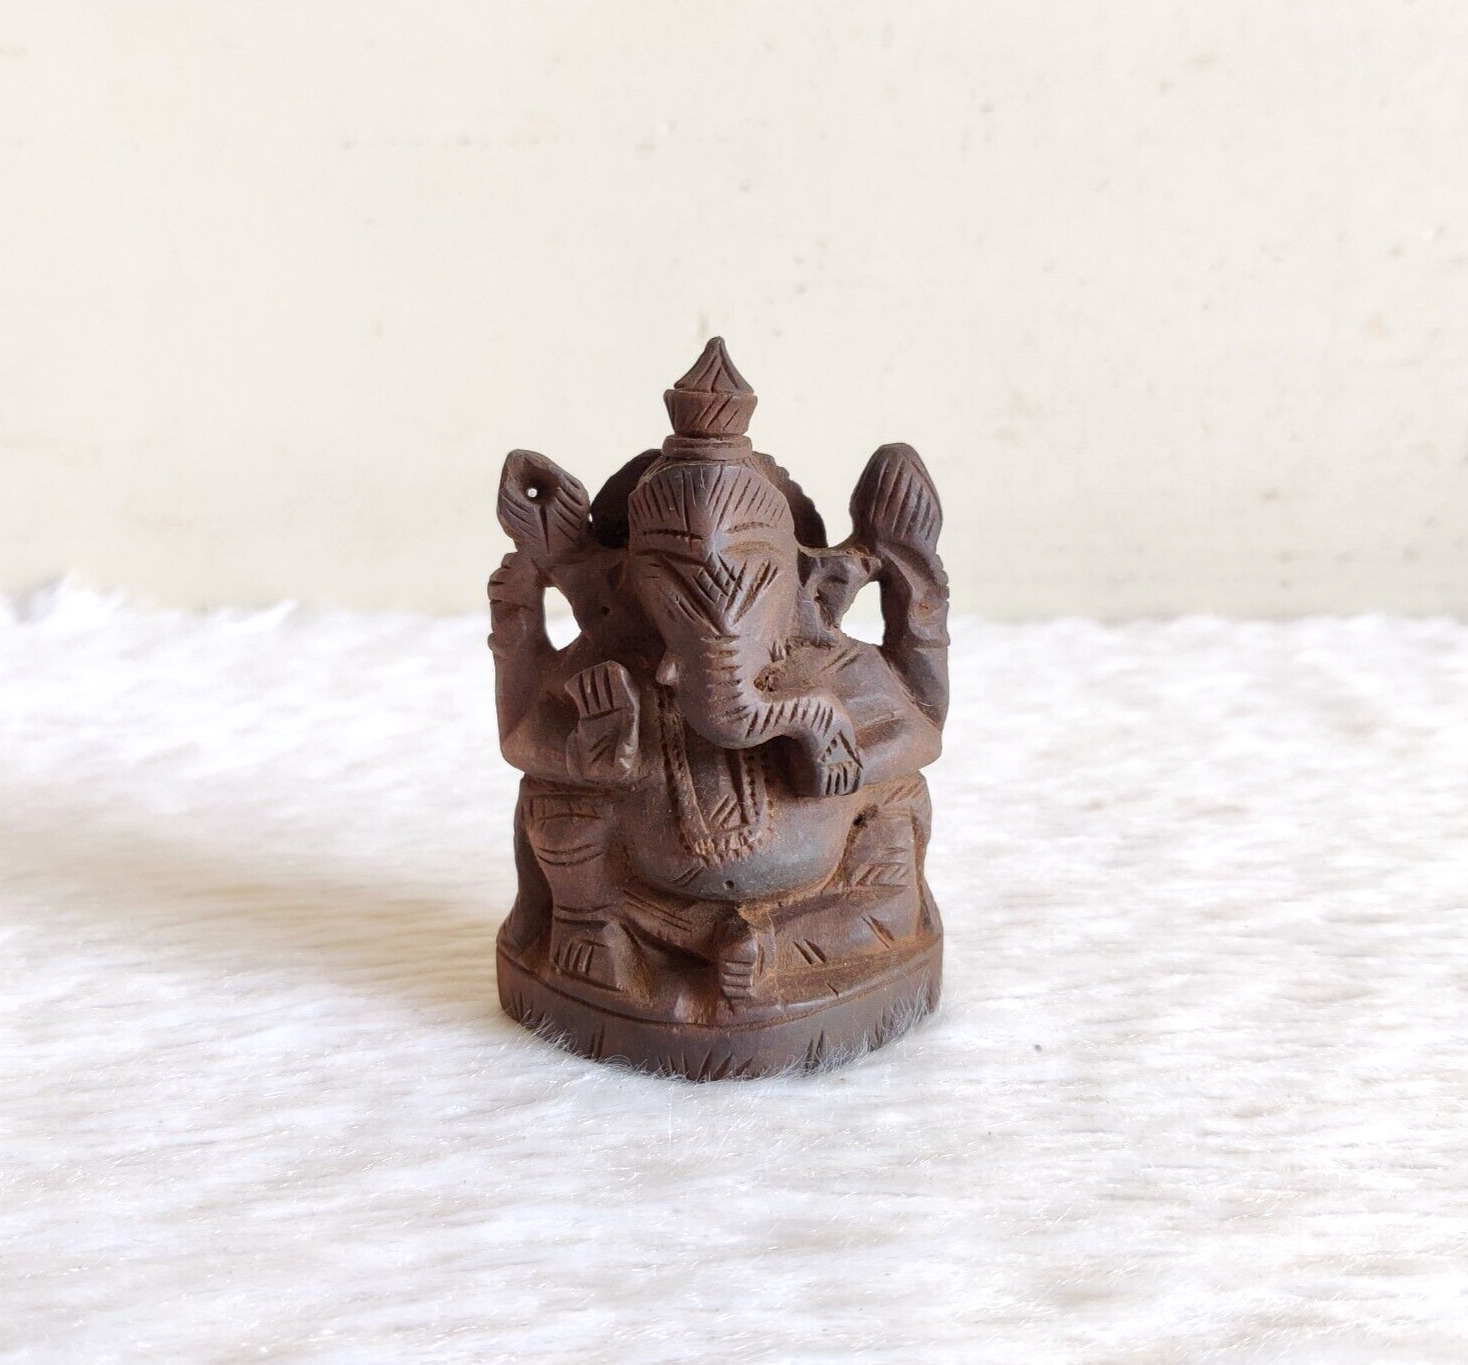 Antique Handmade Lord Ganesha Ganesh Figure Statue Wooden Old Collectible WD570